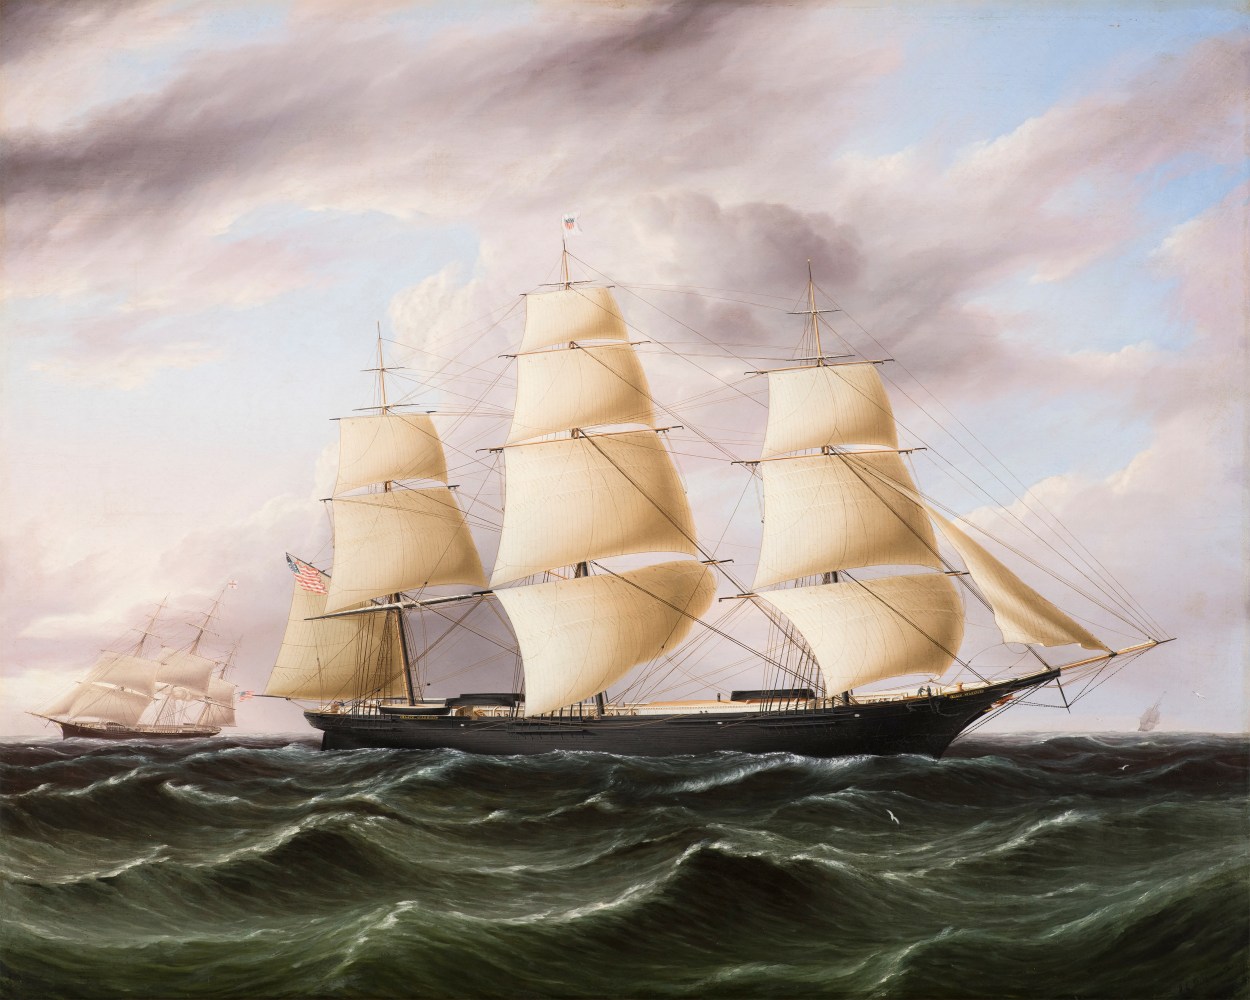 James E. Buttersworth (1819–1894), Clipper Ship Black Warrior, c. 1853, oil on canvas, 29 x 36 in., signed lower right: J. E. Buttersworth